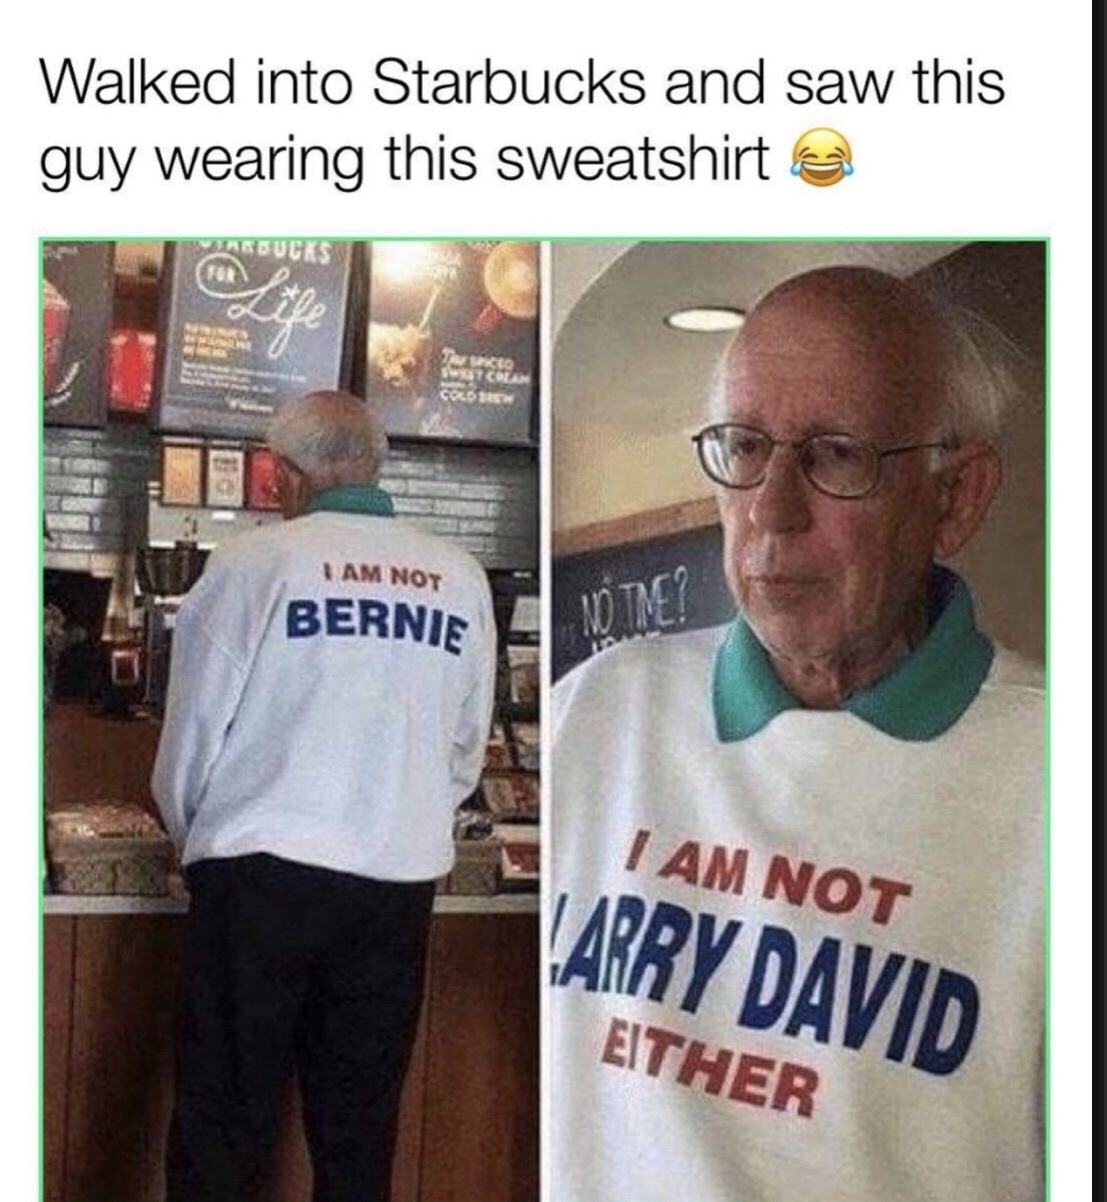 im not bernie meme - Walked into Starbucks and saw this guy wearing this sweatshirt co I Am Not Bernie I Am Not Larry David Either